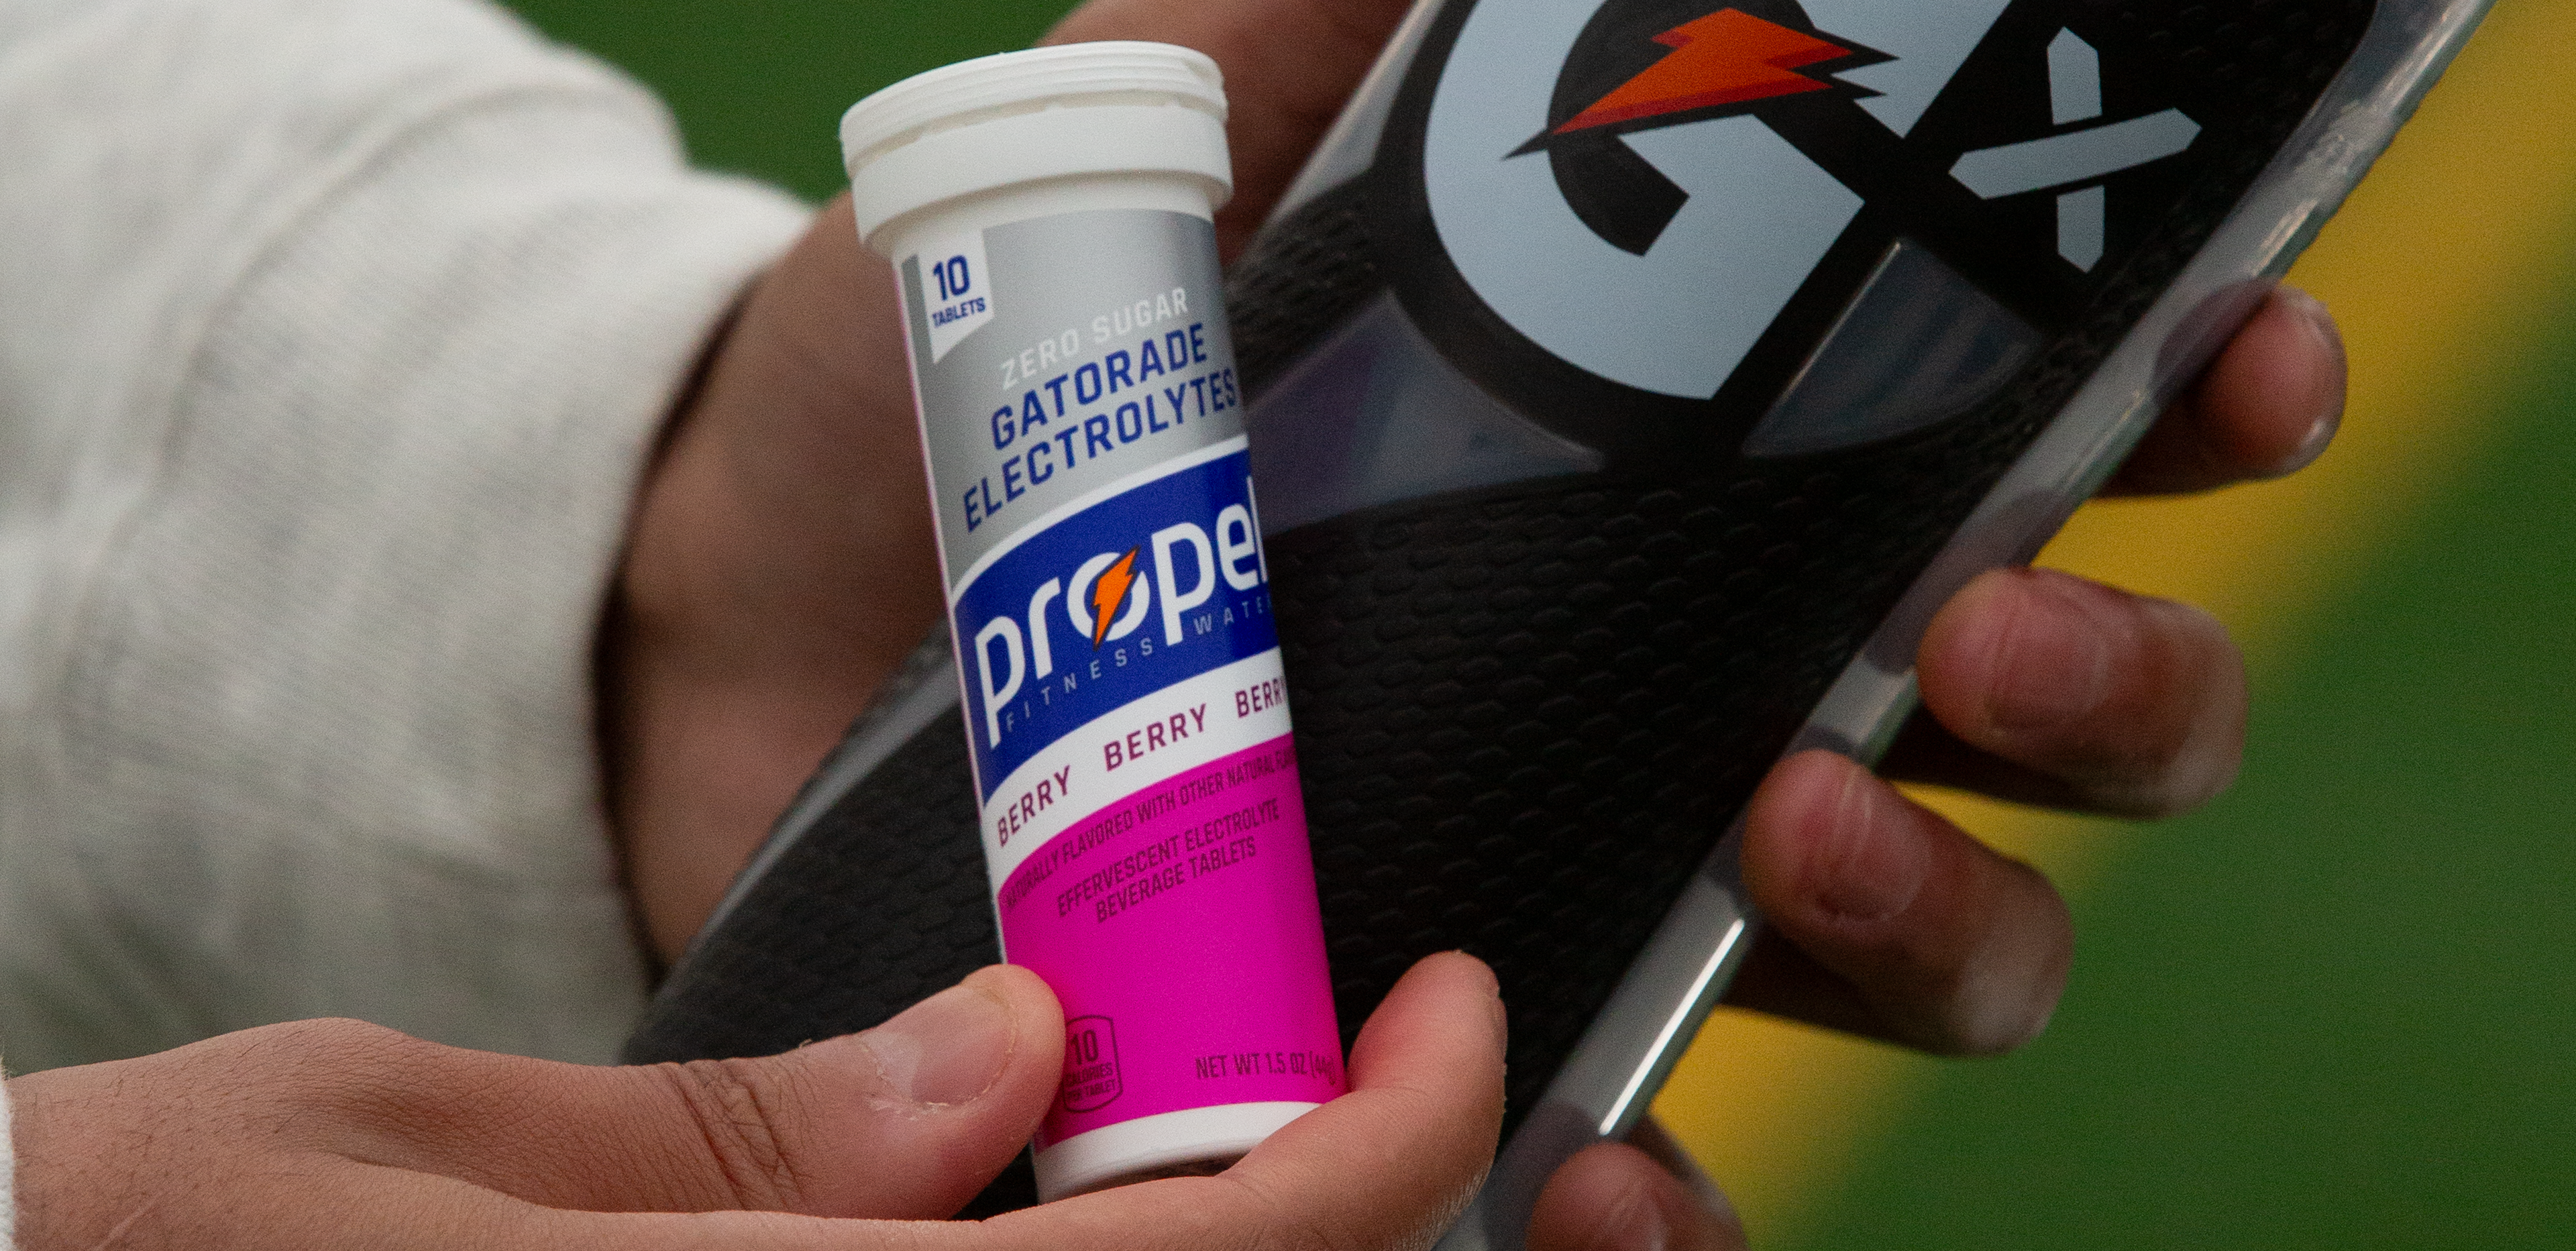 Propel Berry Tablet pack and Gx Squeeze bottle in athlete's hands.